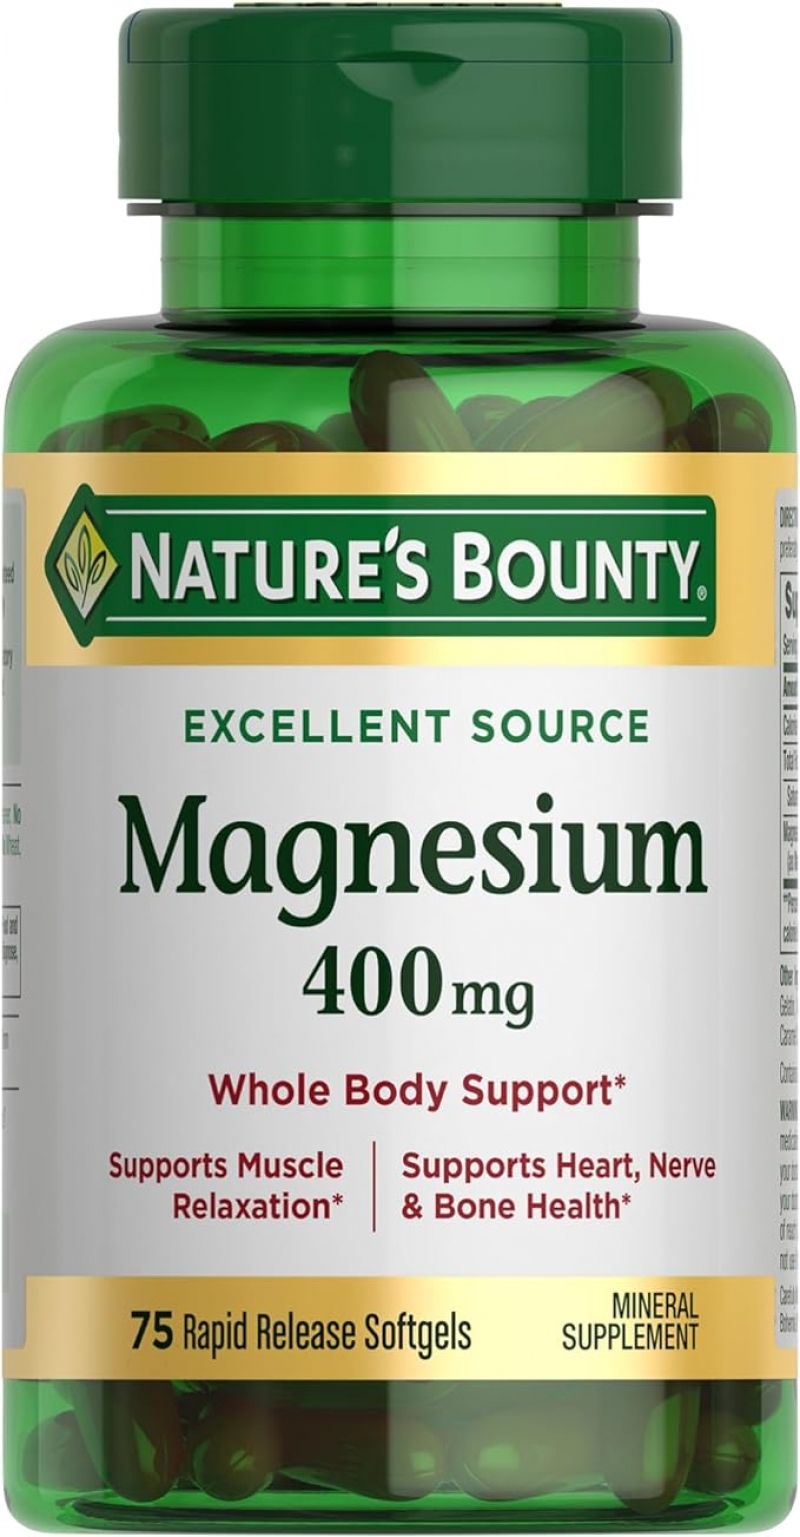 ihocon: Nature's Bounty Magnesium, Whole Body Support, Supports Heart, Nerve and Bone Health镁剂, 400 mg, 75粒